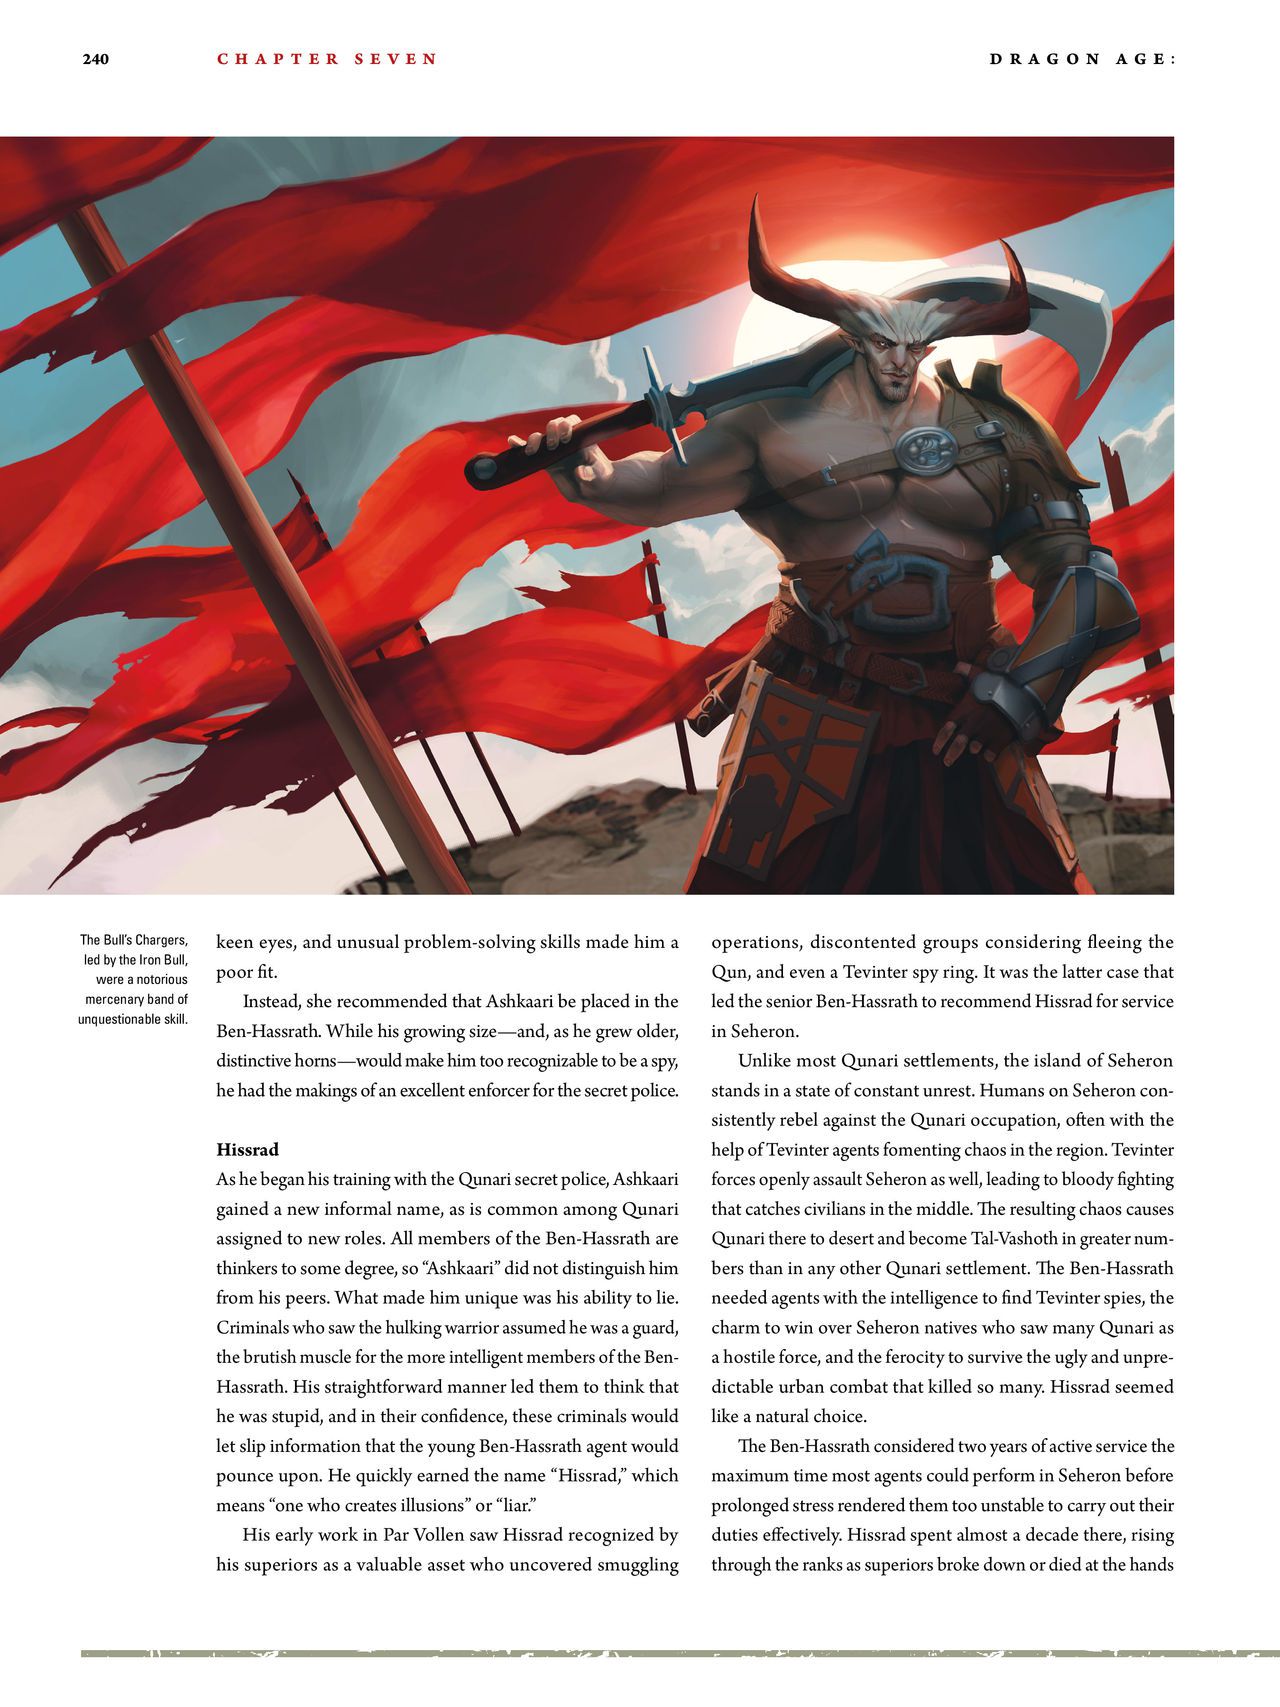 Dragon Age - The World of Thedas v02 234